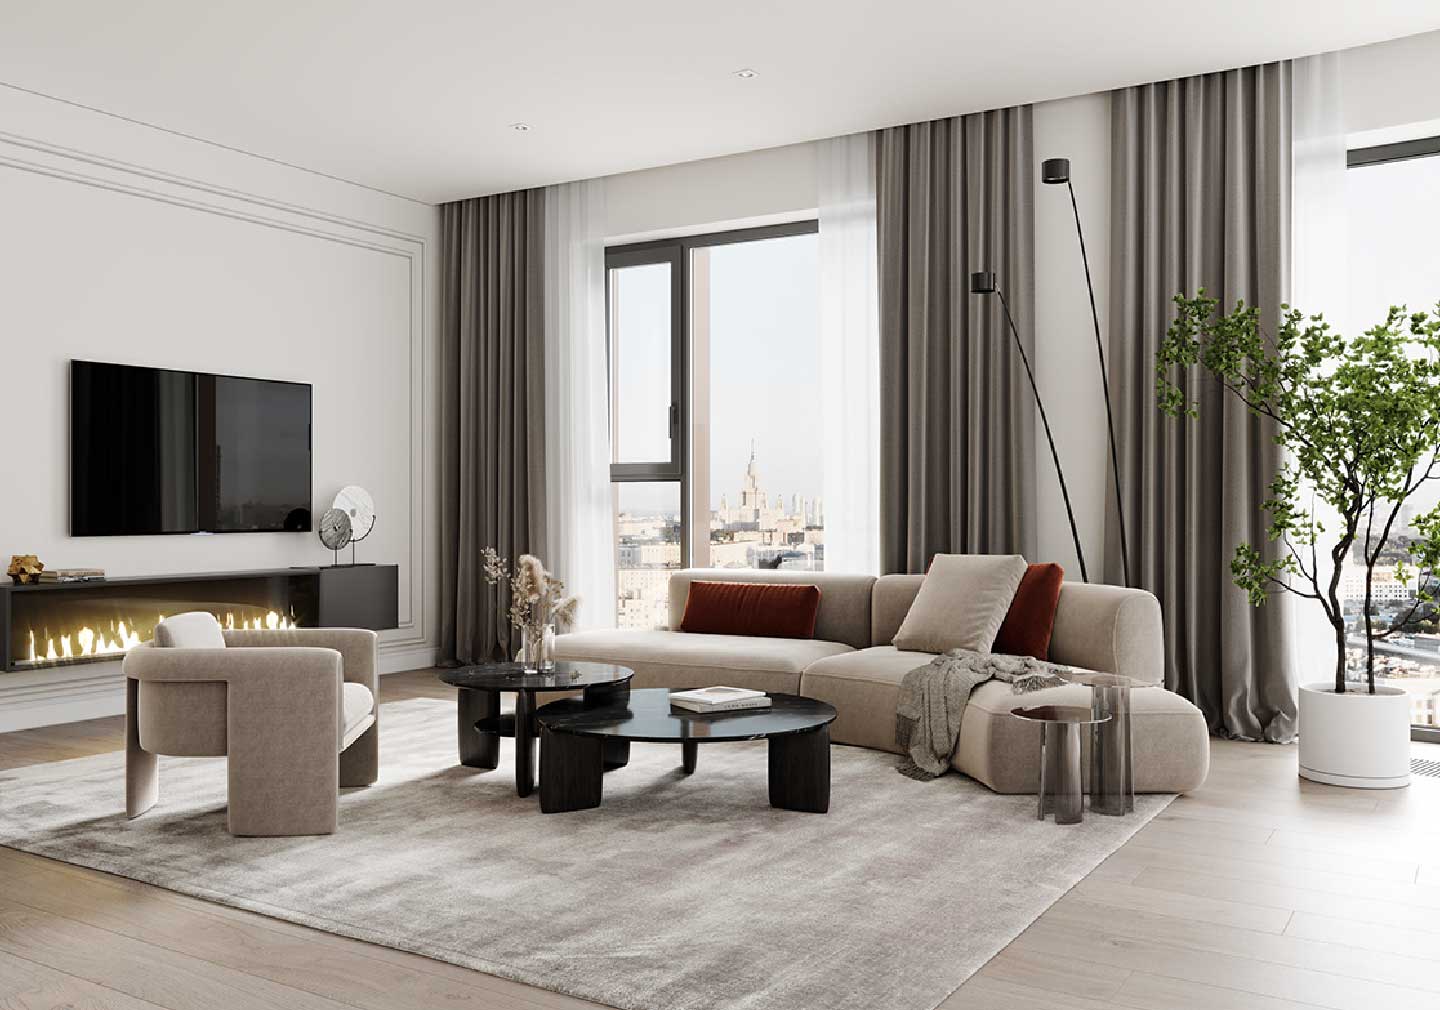 Value for Your Investment: Why Hire an Interior Designer? 